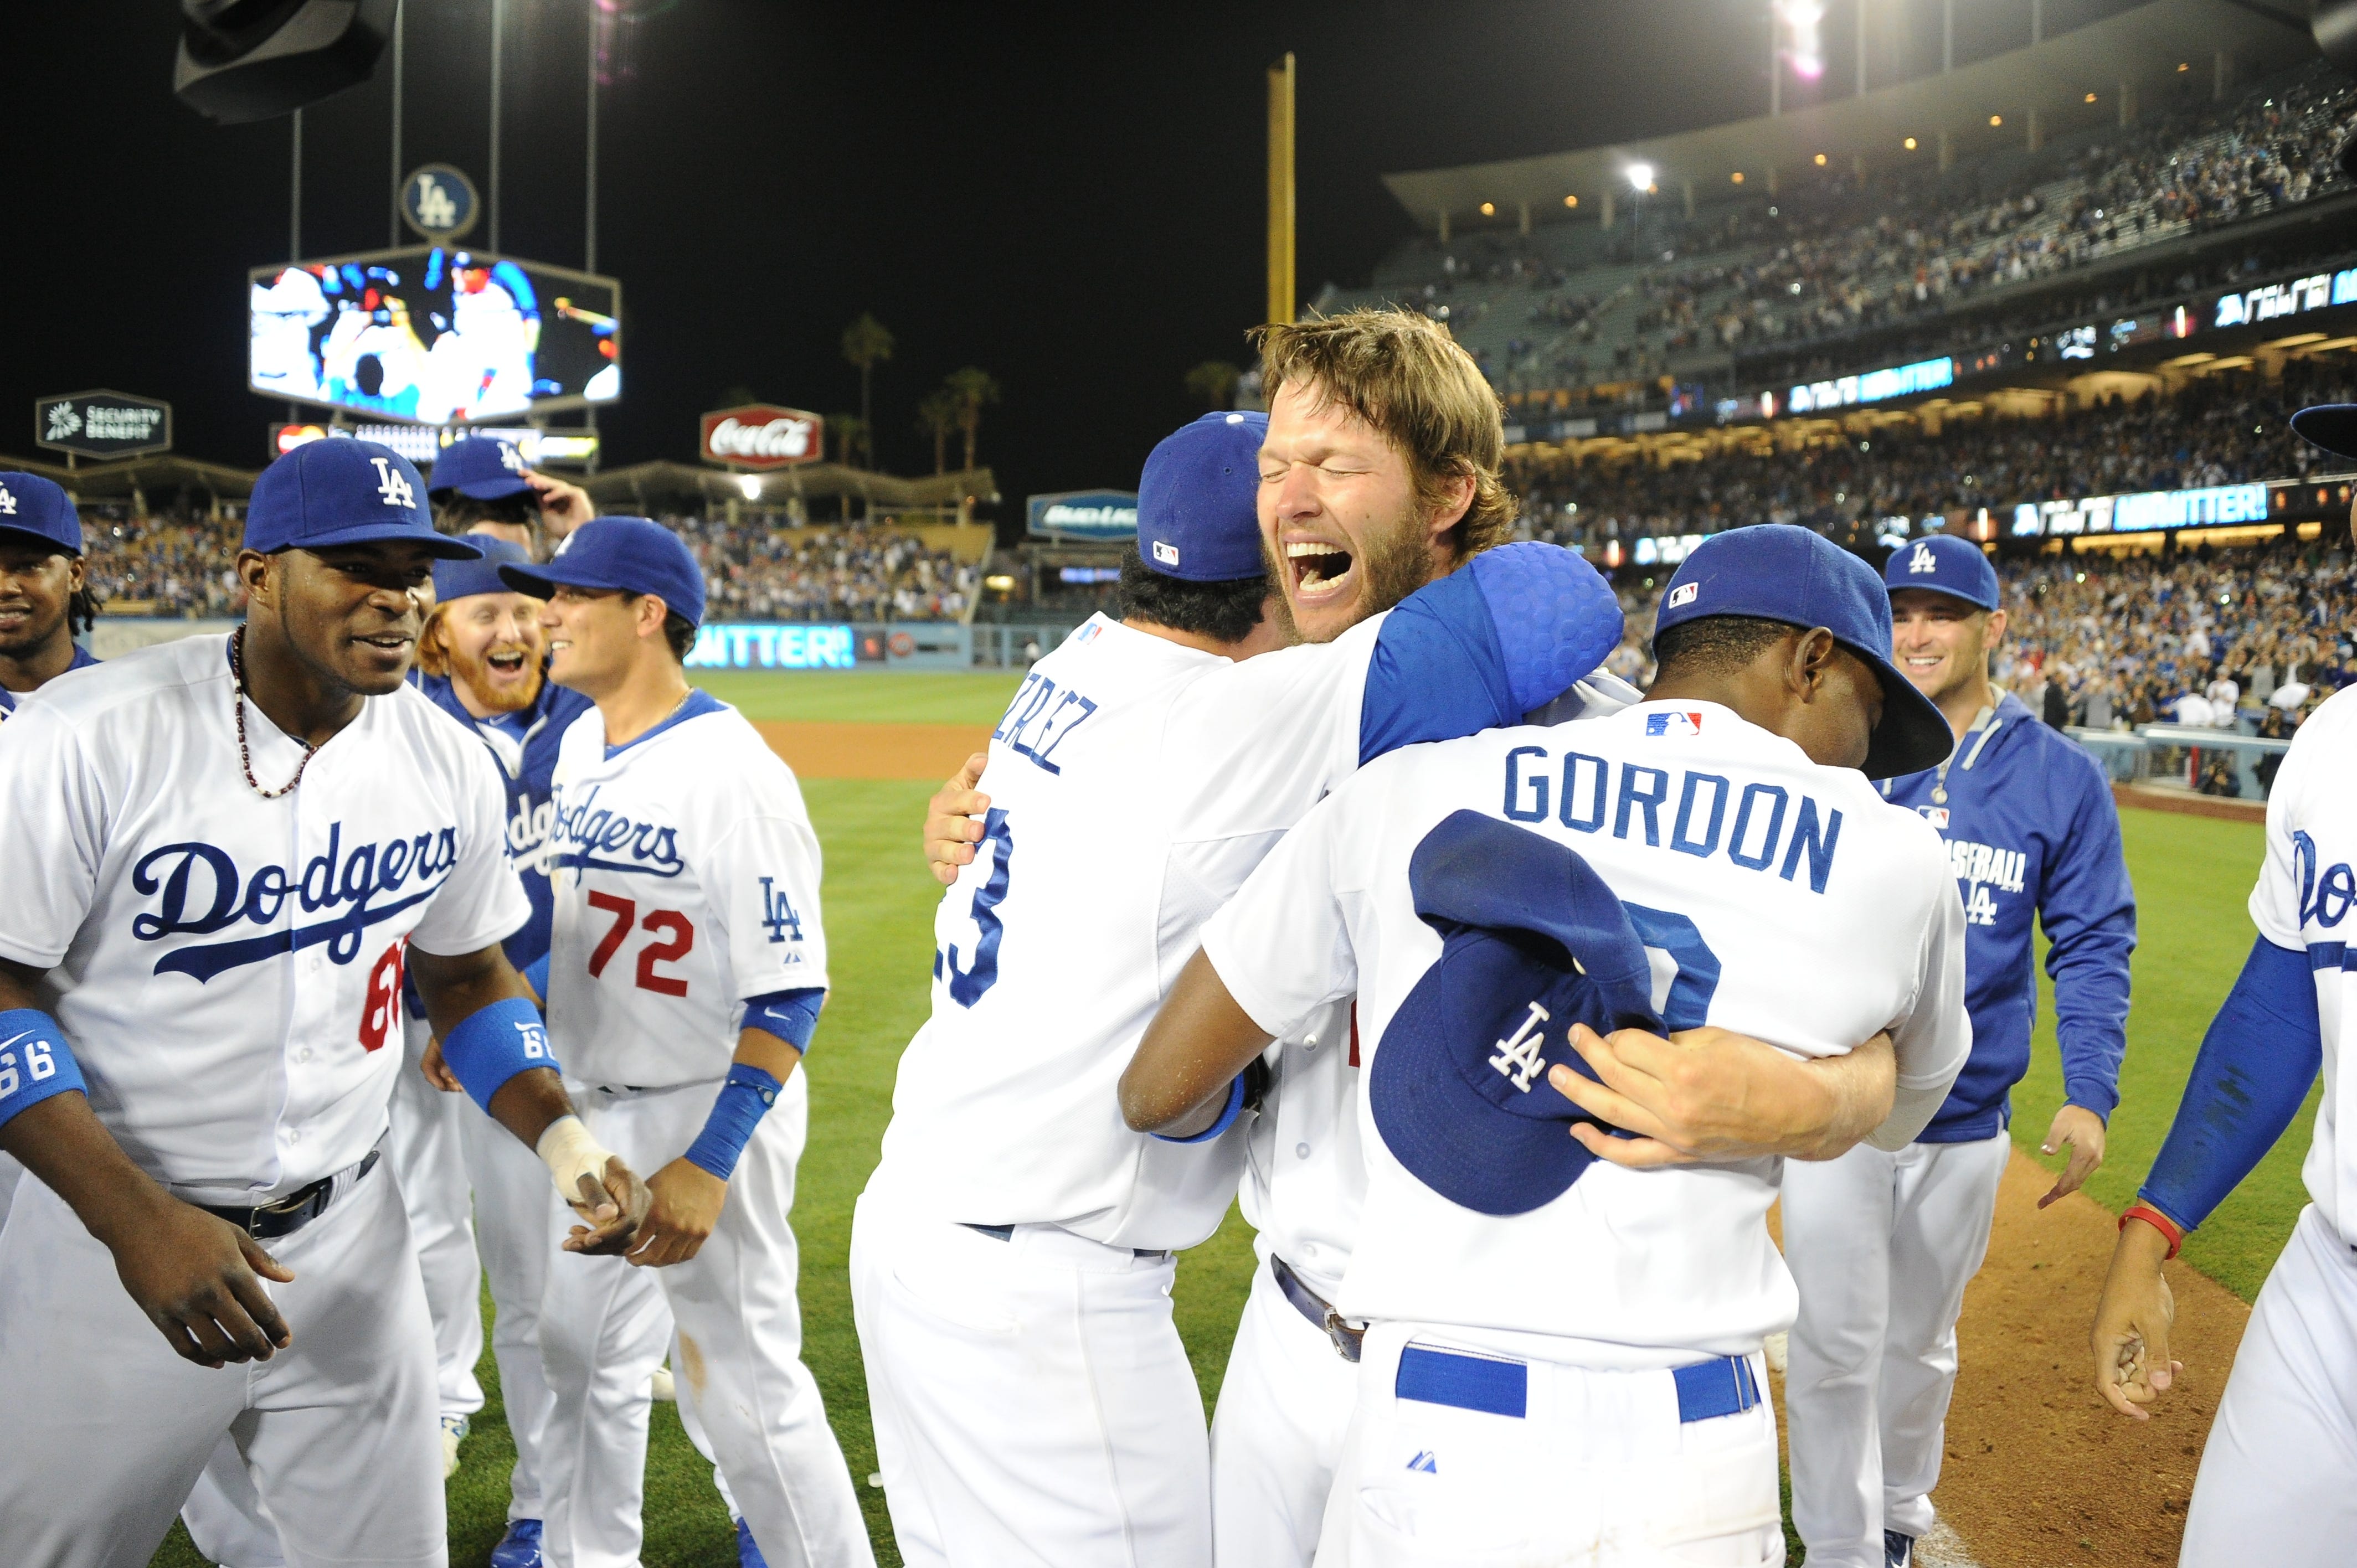 OTD: Clayton Kershaw's no-hitter. Kershaw struck out 15 batters without a…, by Rowan Kavner